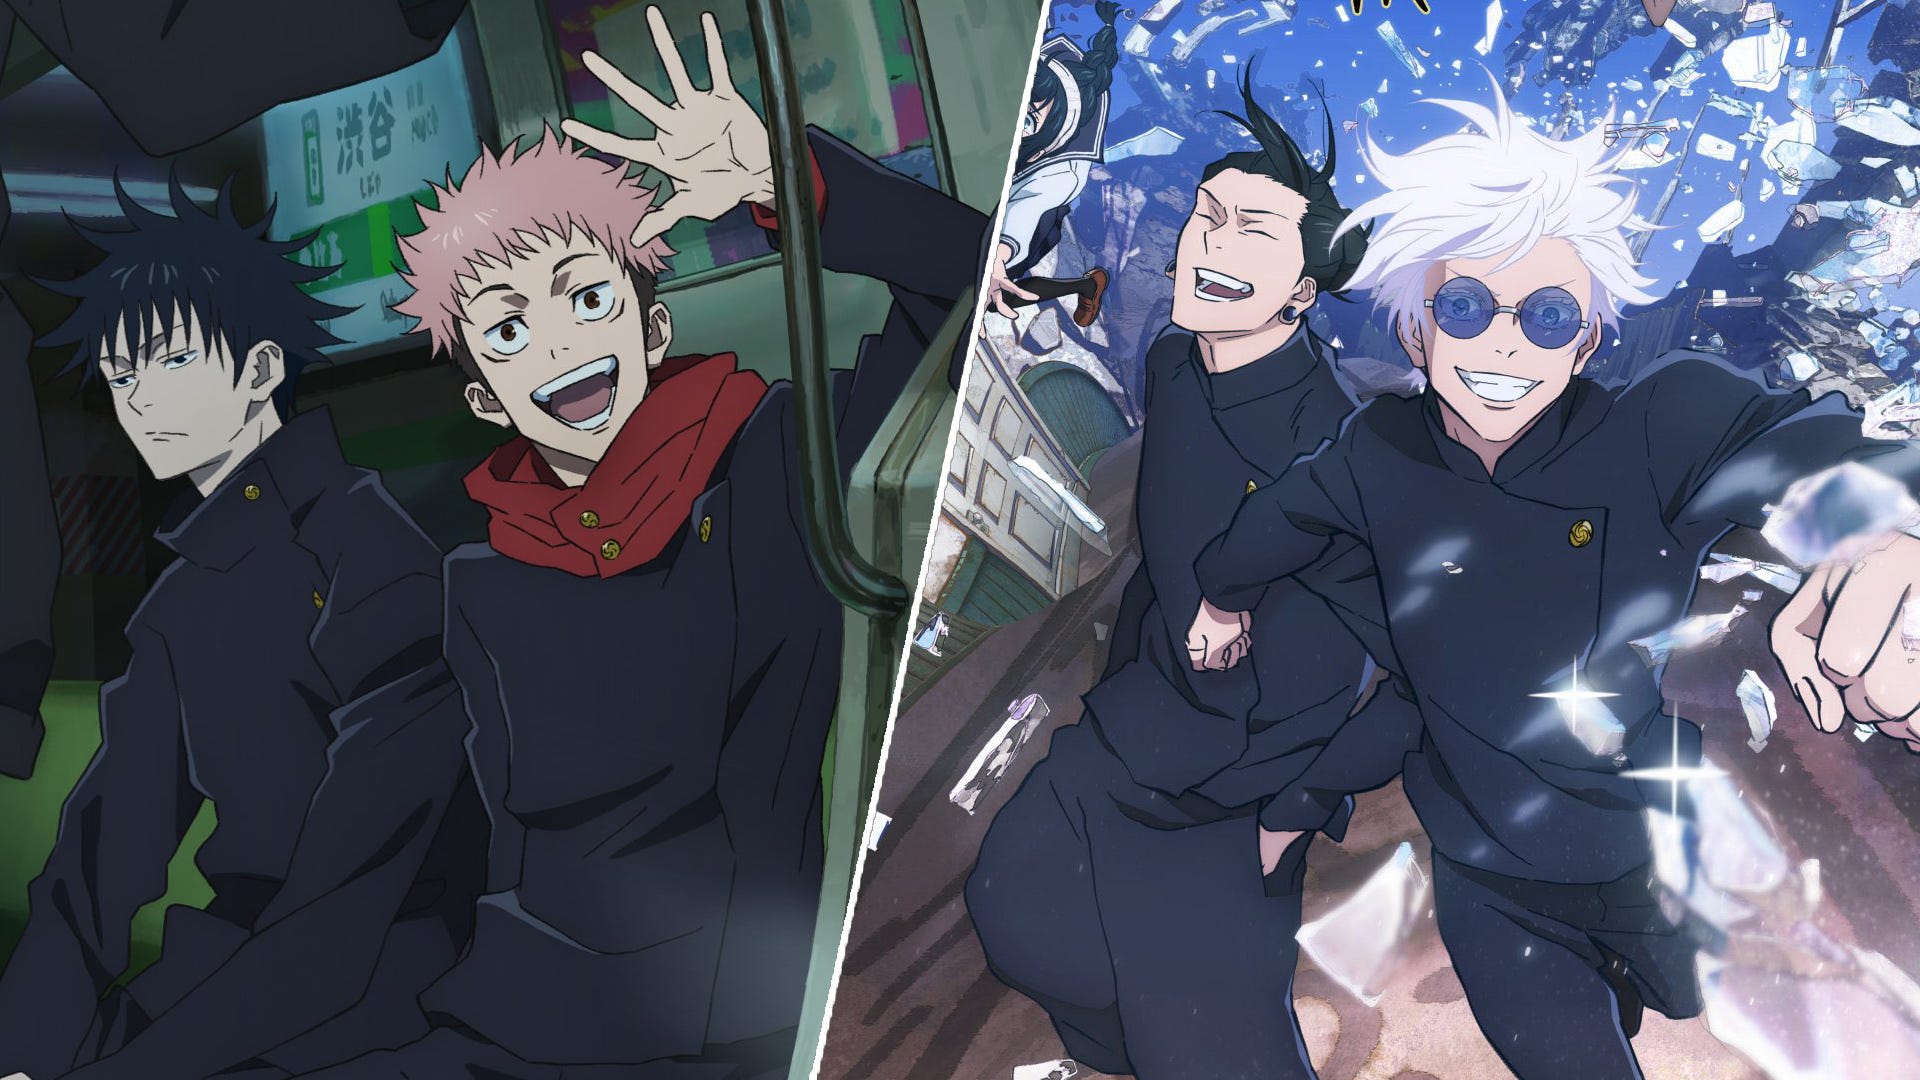 Jujutsu Kaisen is officially the world's most popular anime, and I can't think of a series that deserves it more